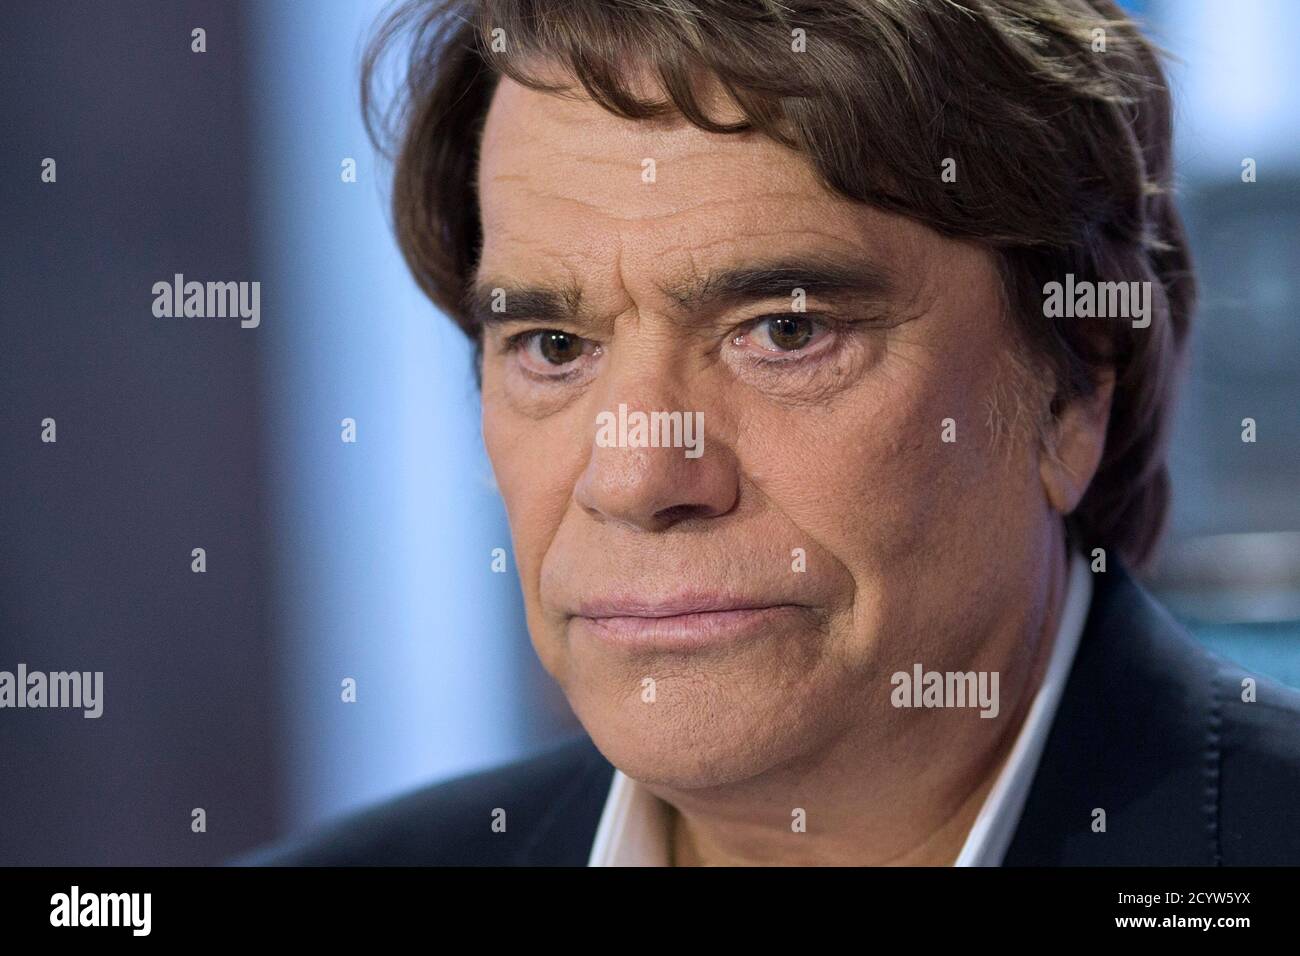 French businessman Bernard Tapie attends the French channel France 2 news  evening broadcast in Paris July 1, 2013. Tapie was put under formal  investigation on suspicion of fraud on Friday in connection